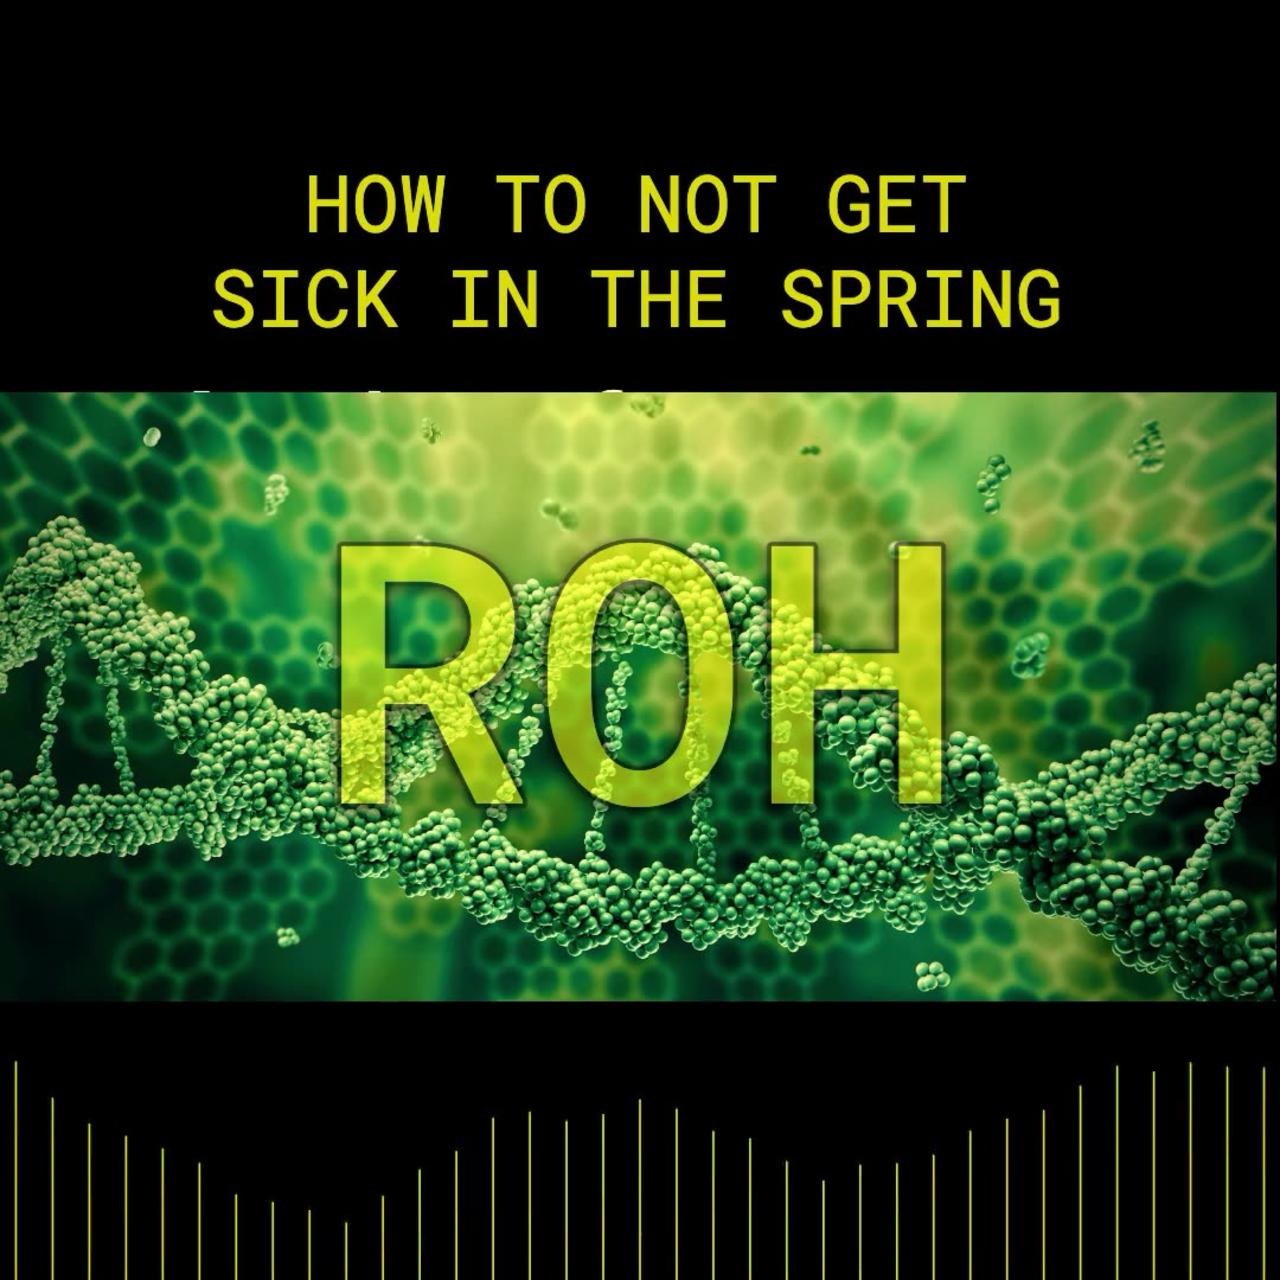 How To Not Get Sick In The Spring